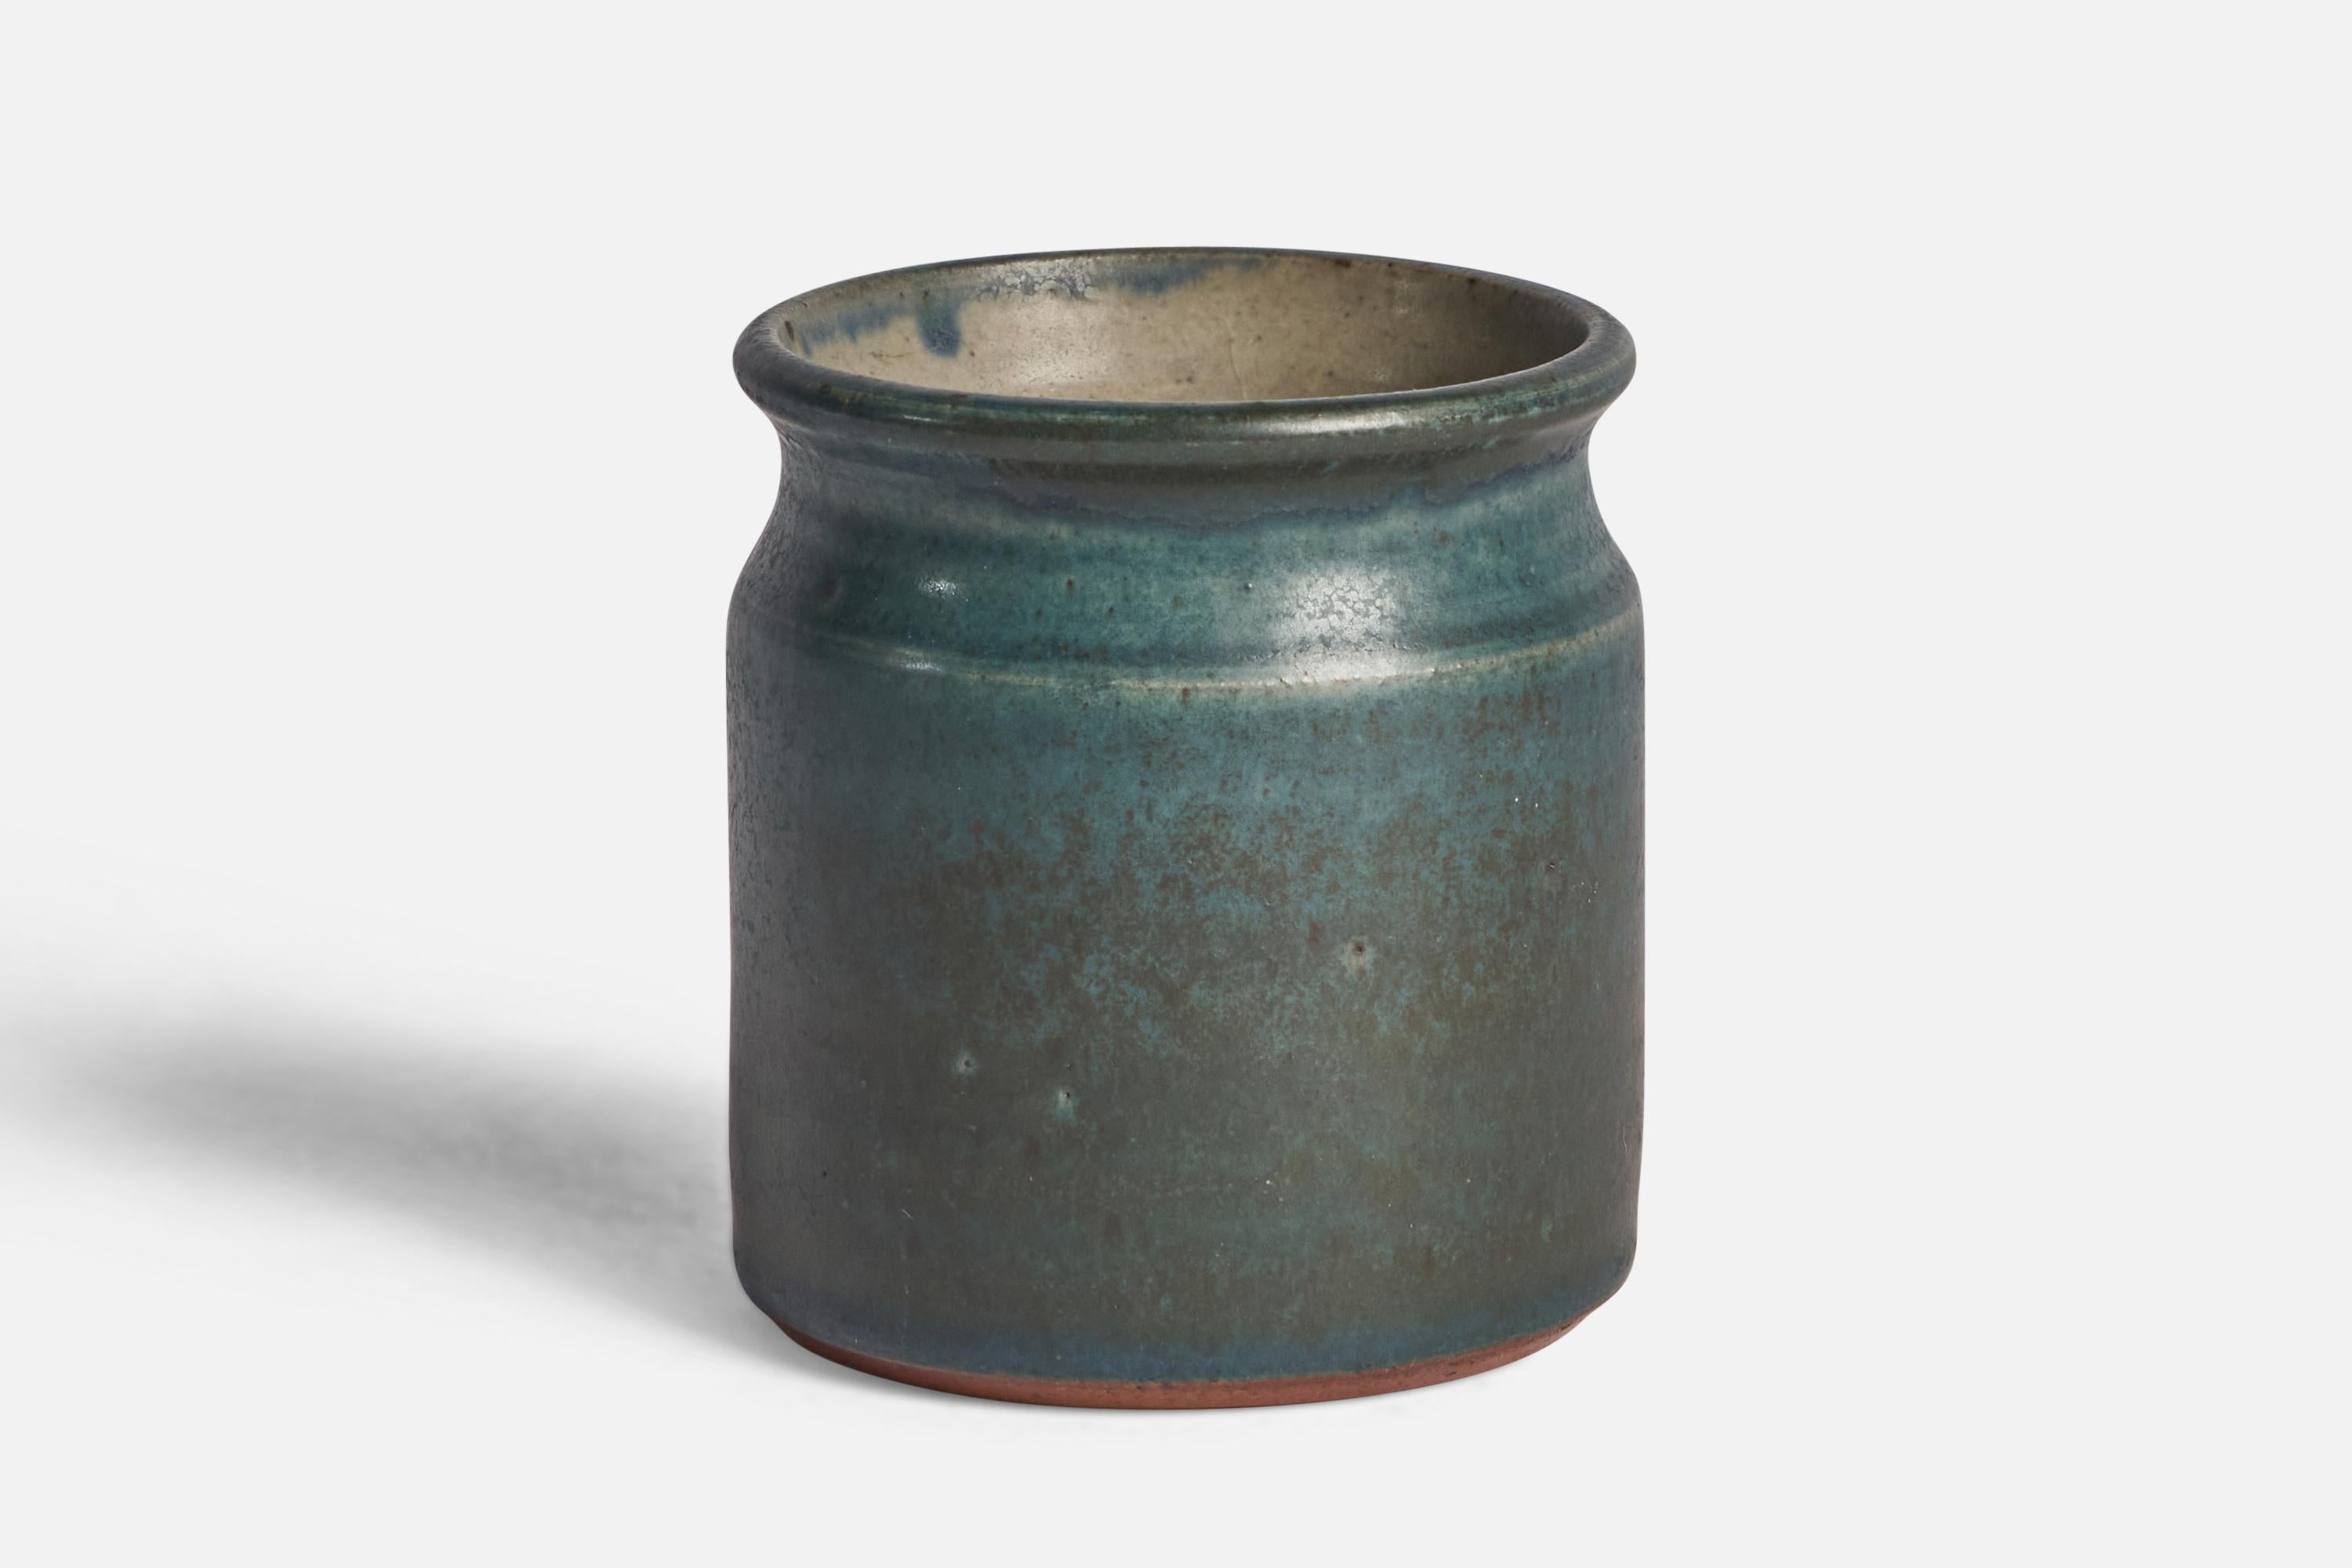 A blue-glazed stoneware vase designed and produced by Rolf Palm, Mölle, Sweden, 1962.

“HOSTSALONG - 62” on bottom (photo attached)